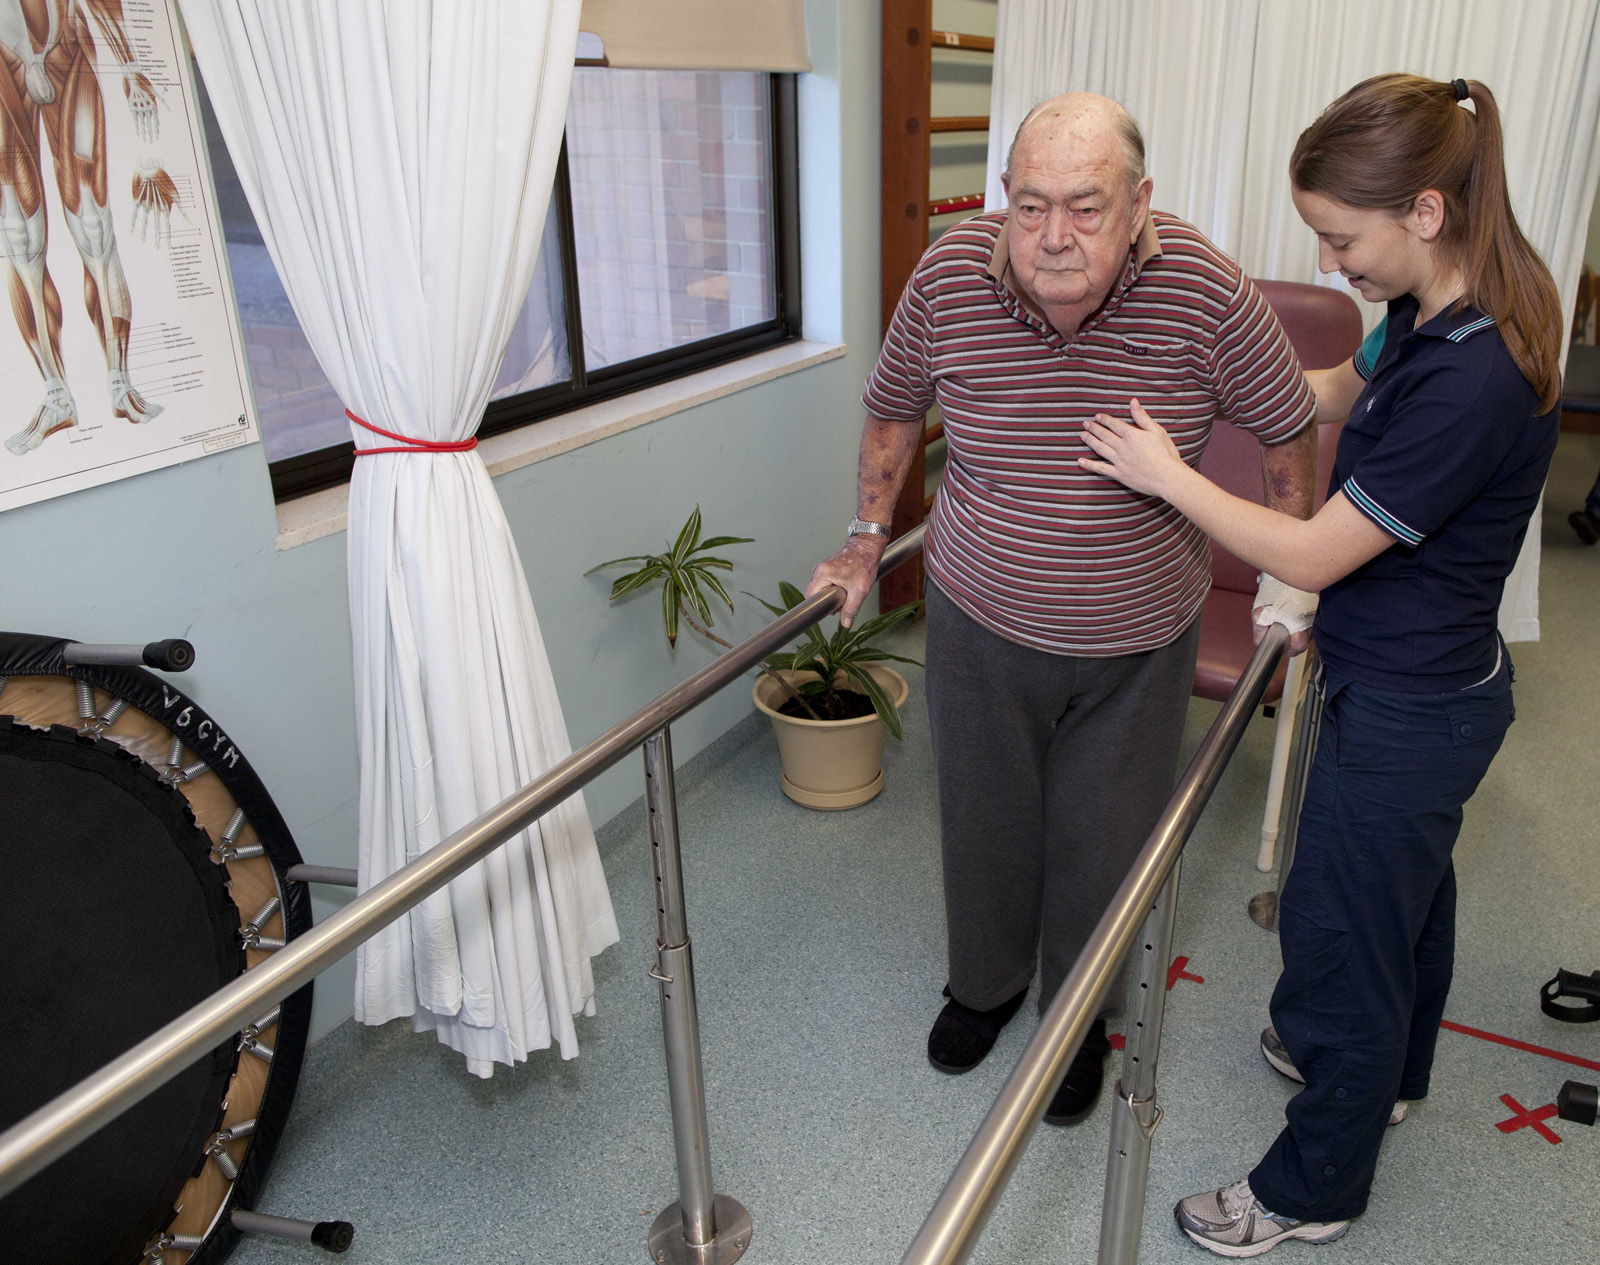 Patient practising walking with the help of a physiotherapist